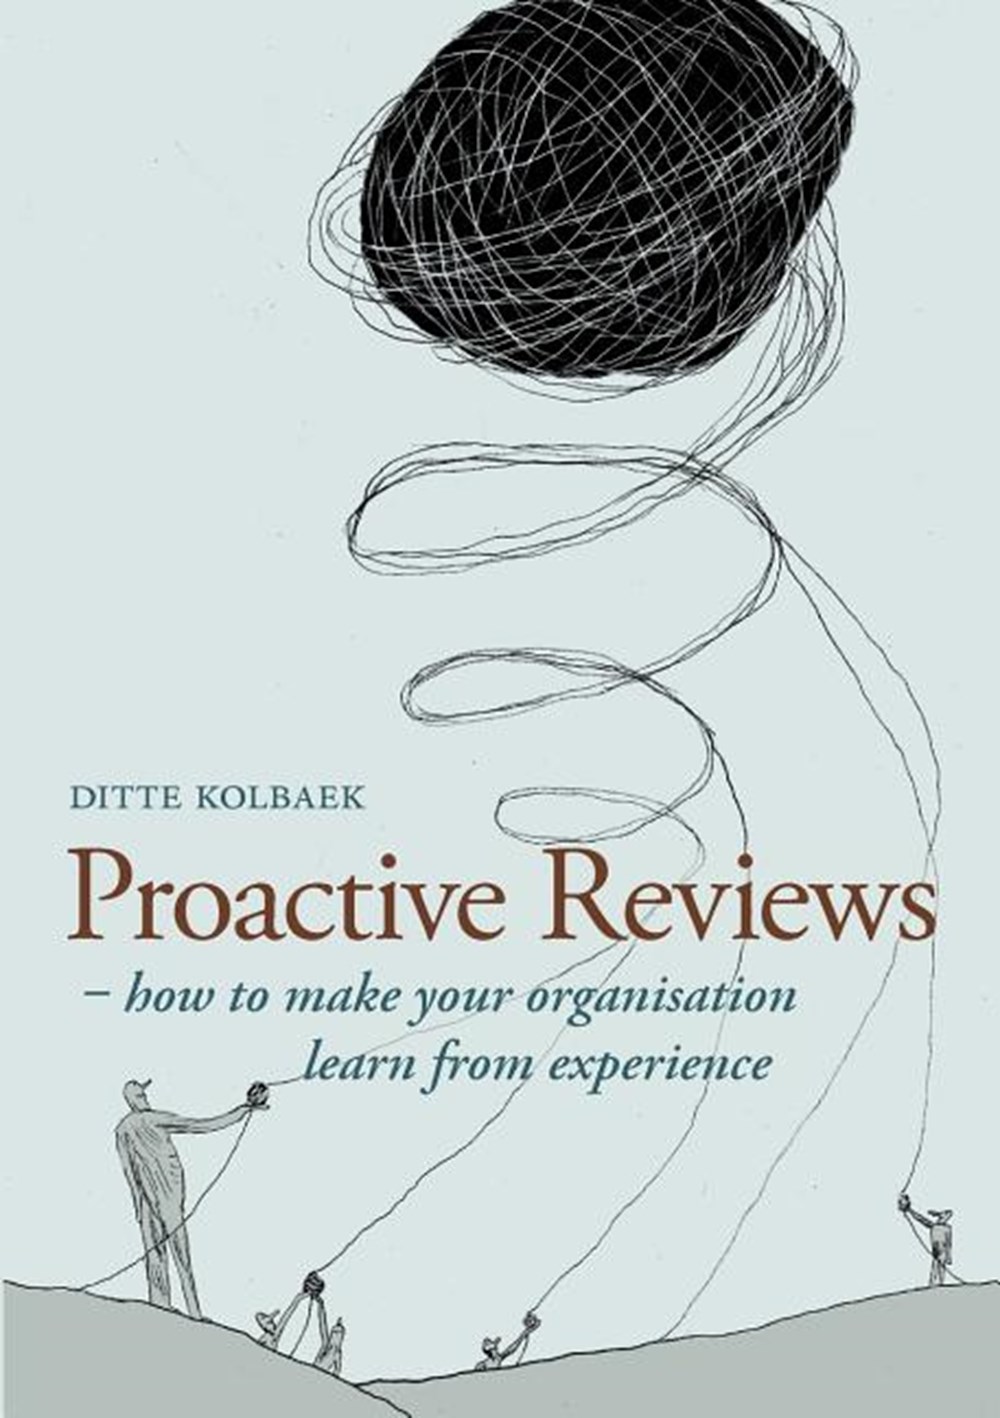 Proactive Reviews How to make your organisation learn from experience